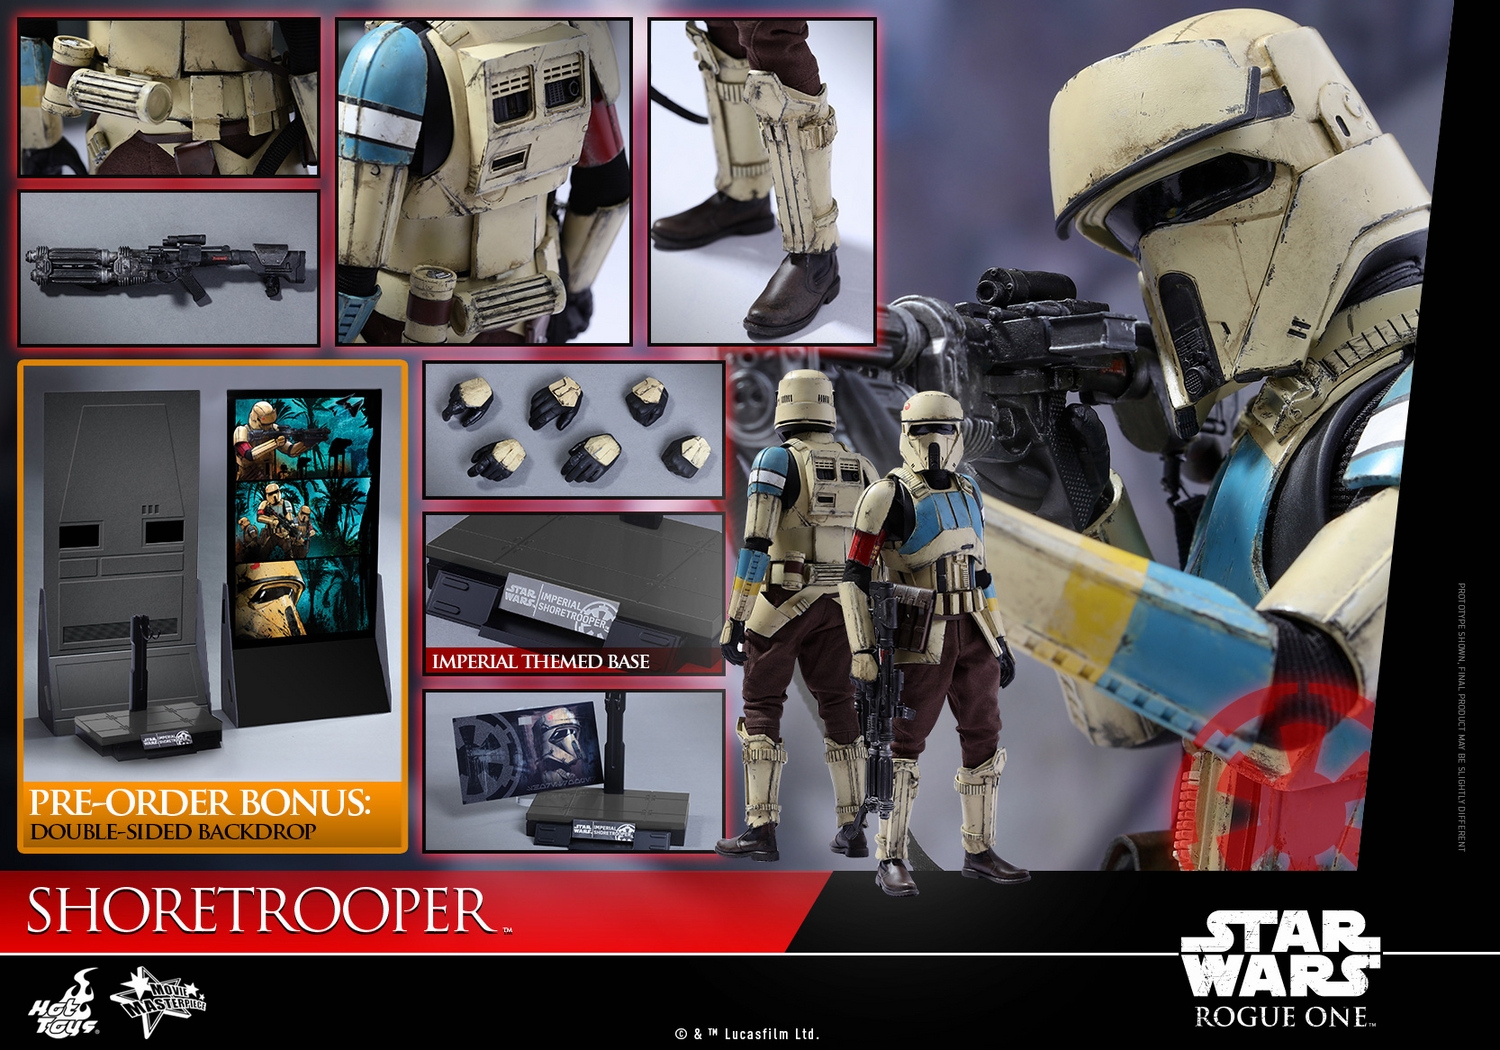 hot-toys-star-wars-rogue-one-shoretrooper-collectible-figure-092916-009.jpg